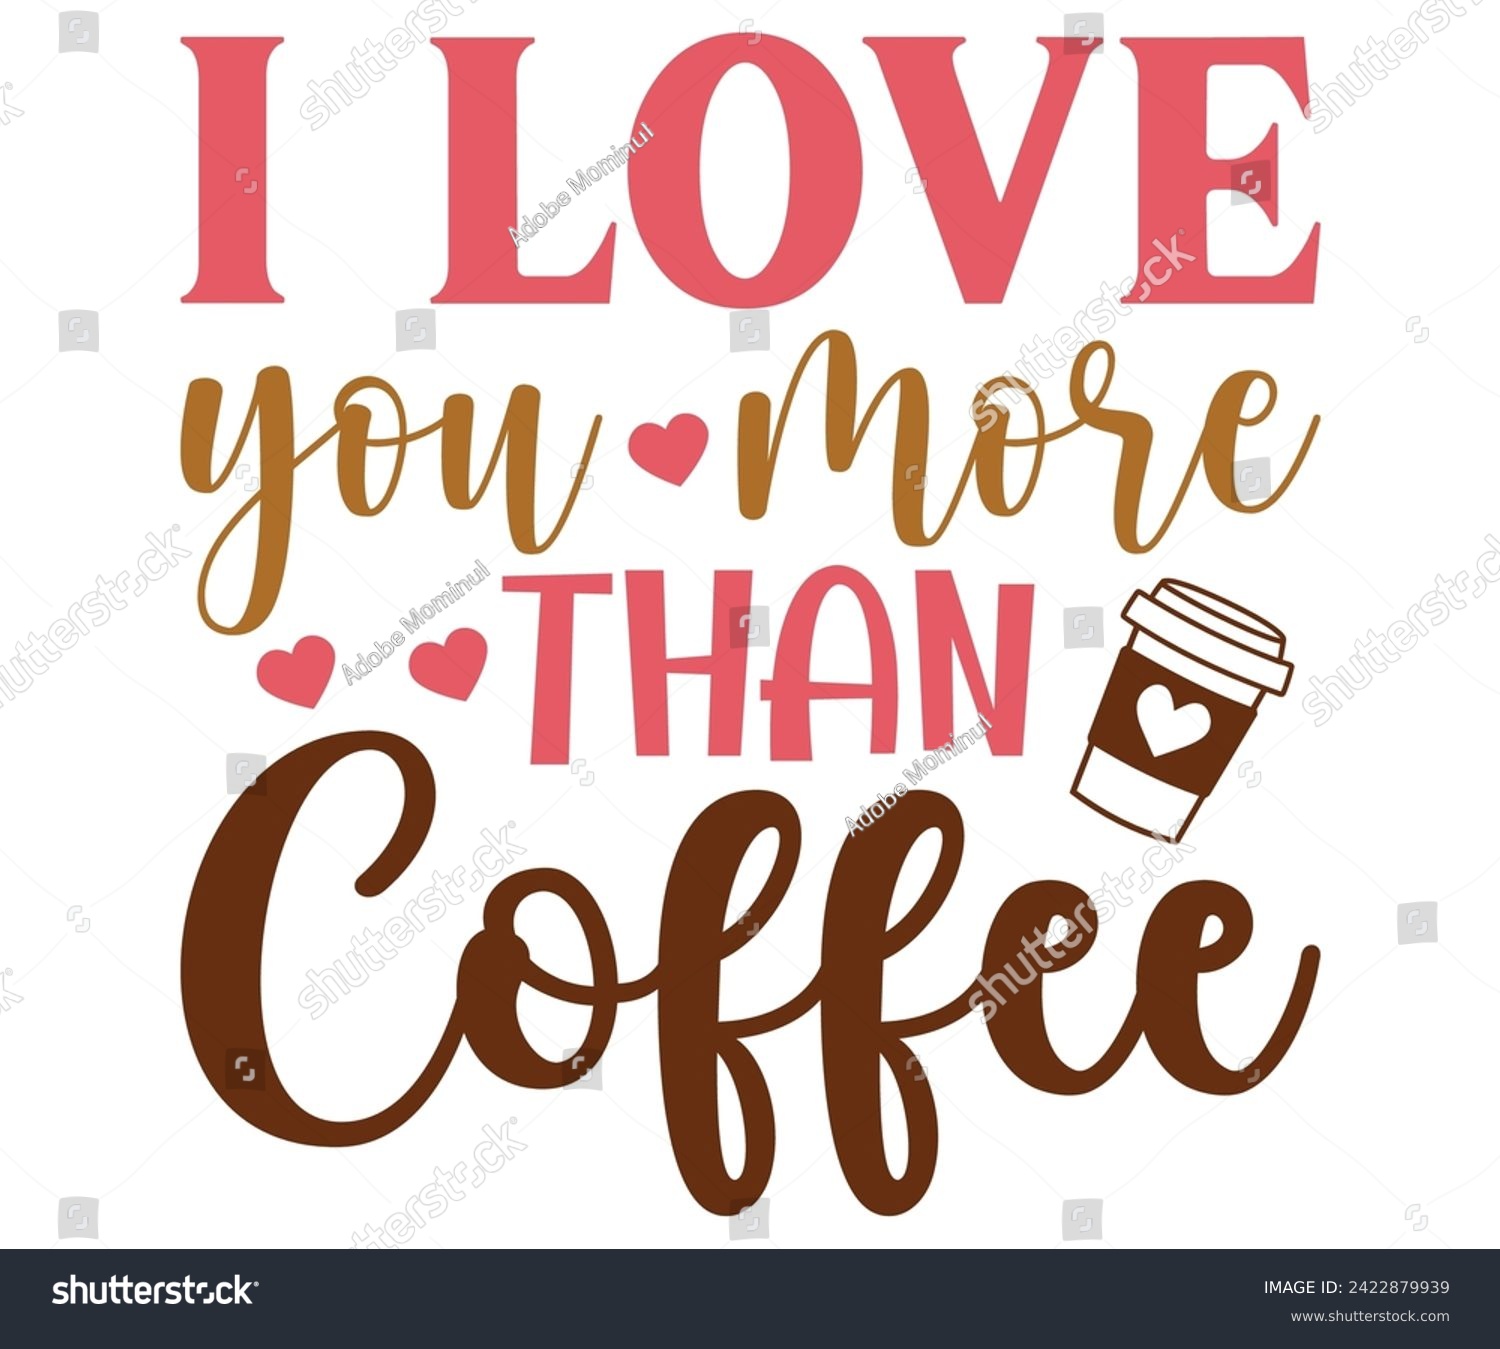 SVG of I love You More Than Coffee Svg,Coffee Svg,Coffee Retro,Funny Coffee Sayings,Coffee Mug Svg,Coffee Cup Svg,Gift For Coffee,Coffee Lover,Caffeine Svg,Svg Cut File,Coffee Quotes,Sublimation Design, svg